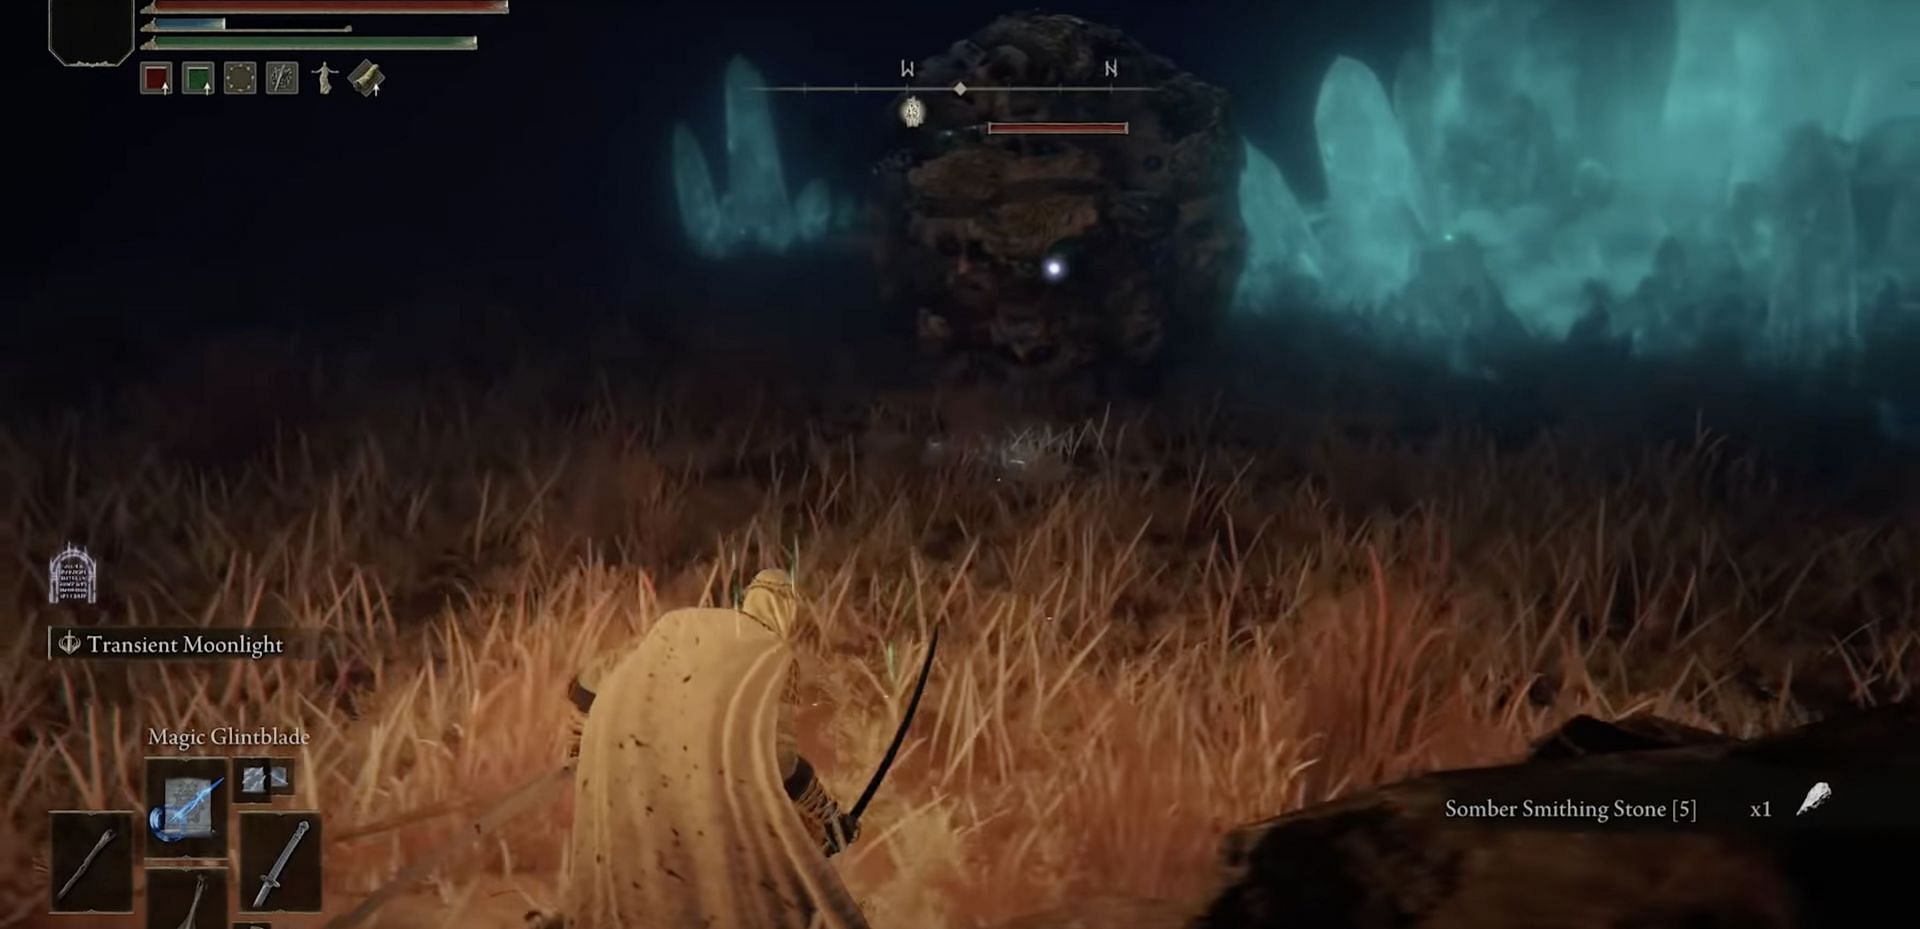 Players can find Somber Smithing Stone (5) in a few locations in Elden Ring (Image via Sofa Superstar Gaming/YouTube)